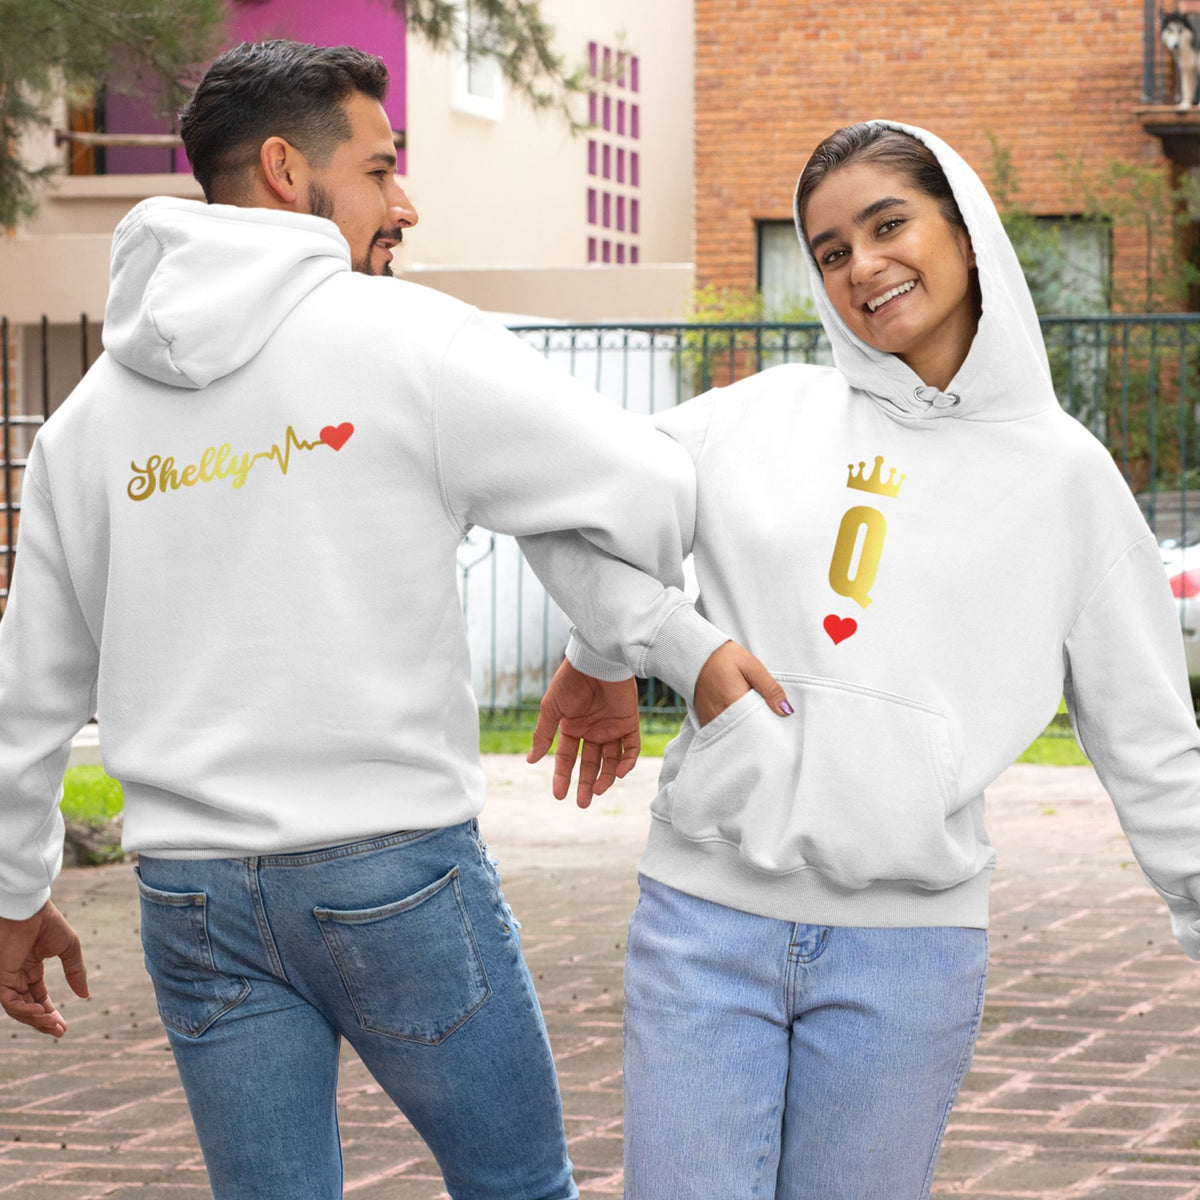 king-and-queen-personalised-hoodies-with-gold-metallic-print-on-front-back-sleeve-_-wrists-white-front-gogirgit-com